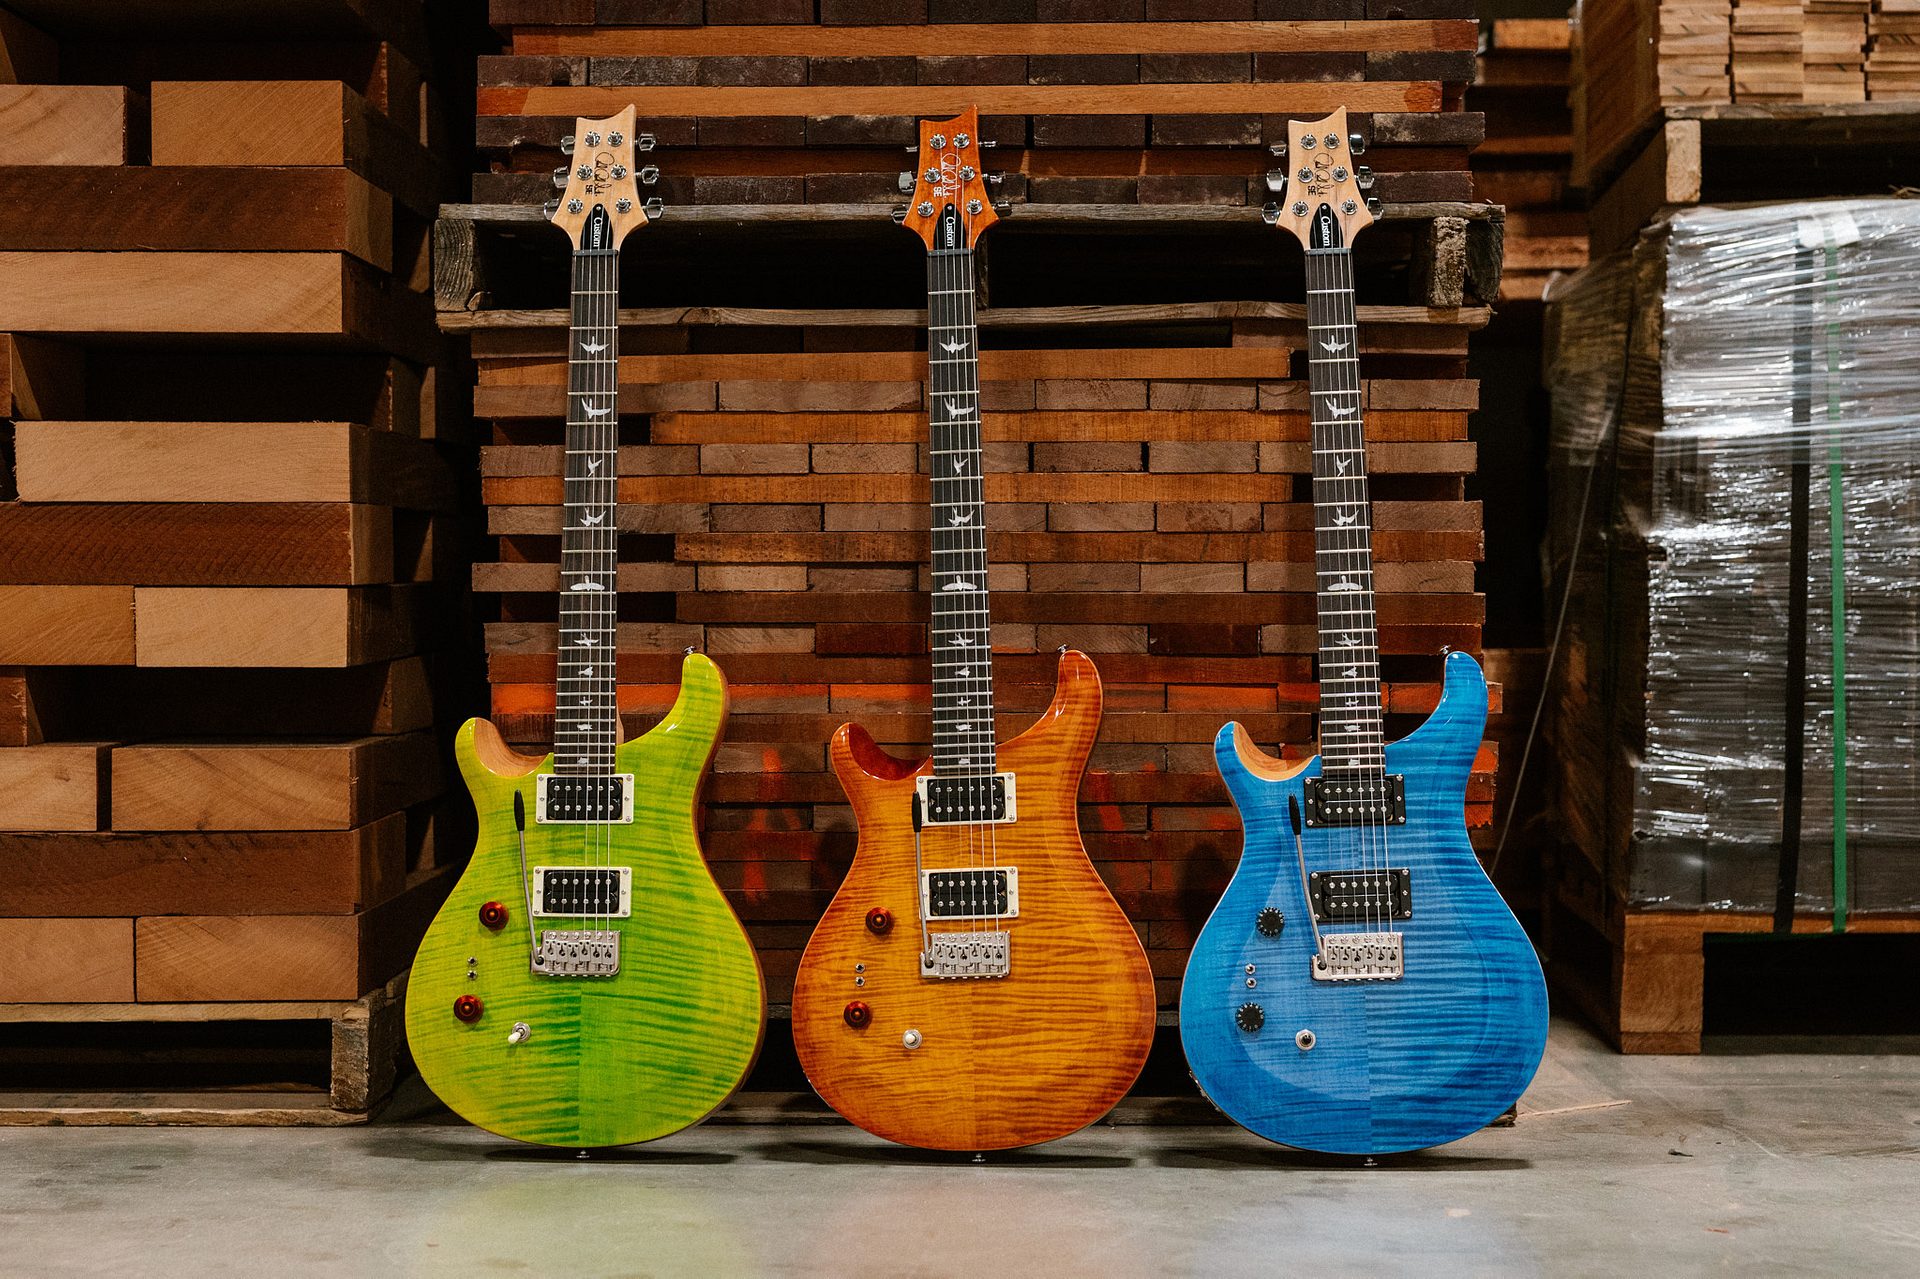 New SE Lefty Models - Coming this Fall!